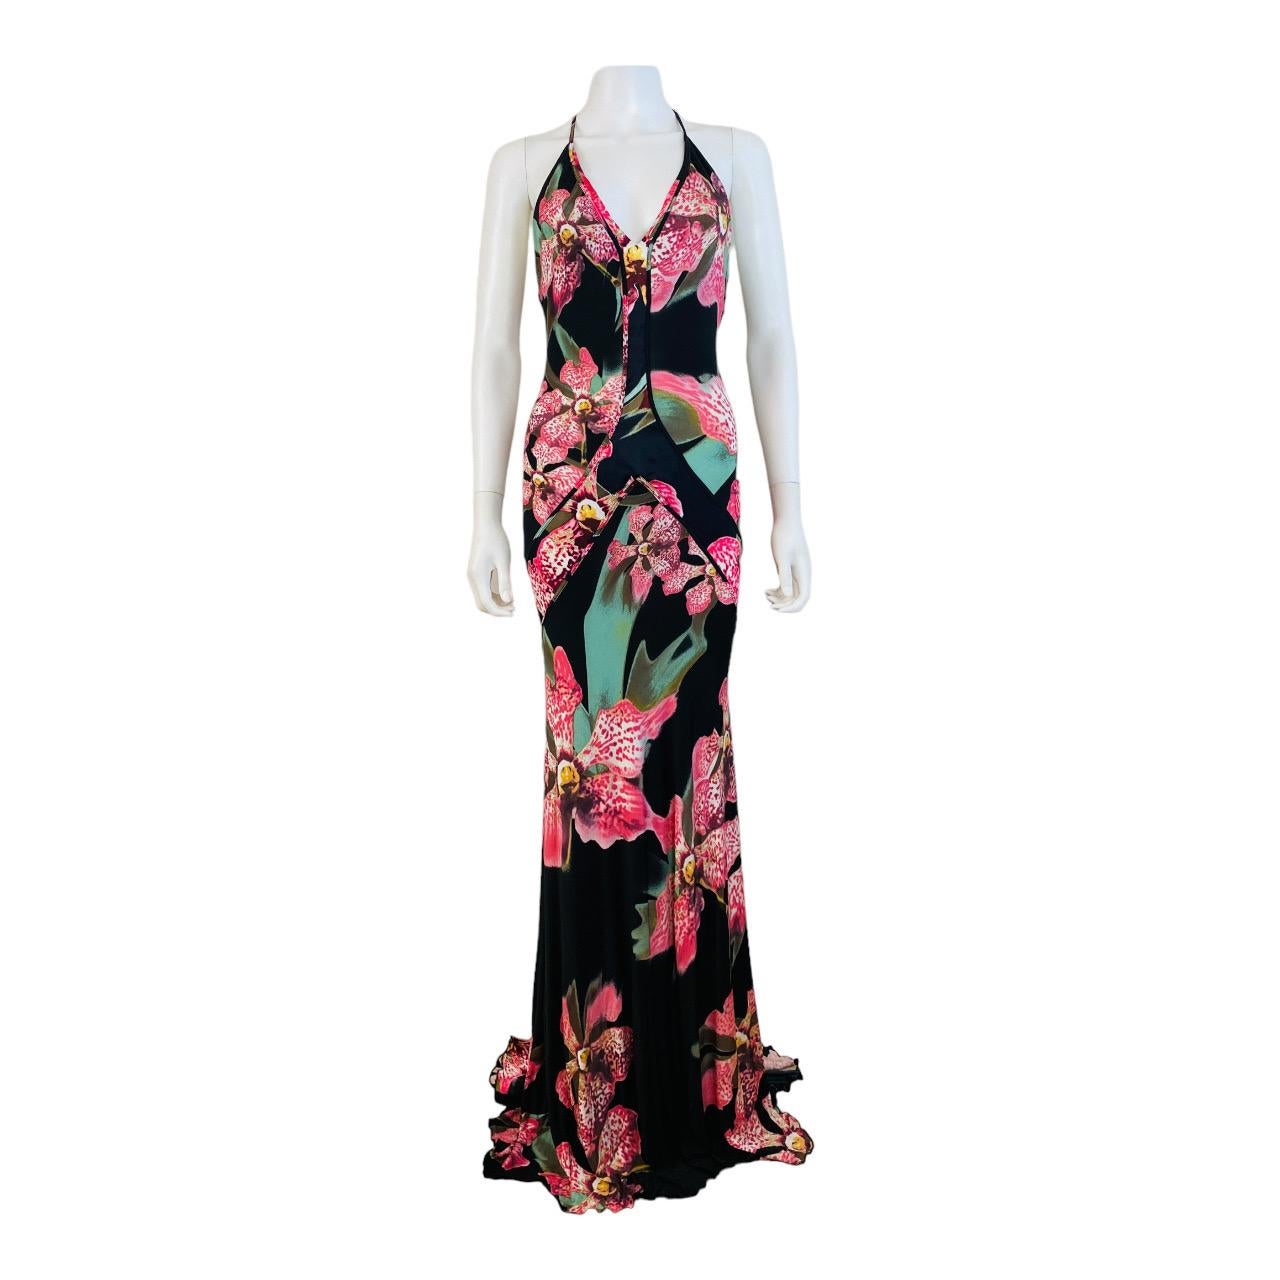 Vintage Roberto Cavalli F/W 2004 Floral Orchid Print Pink + Black Dress Gown In Excellent Condition For Sale In Denver, CO